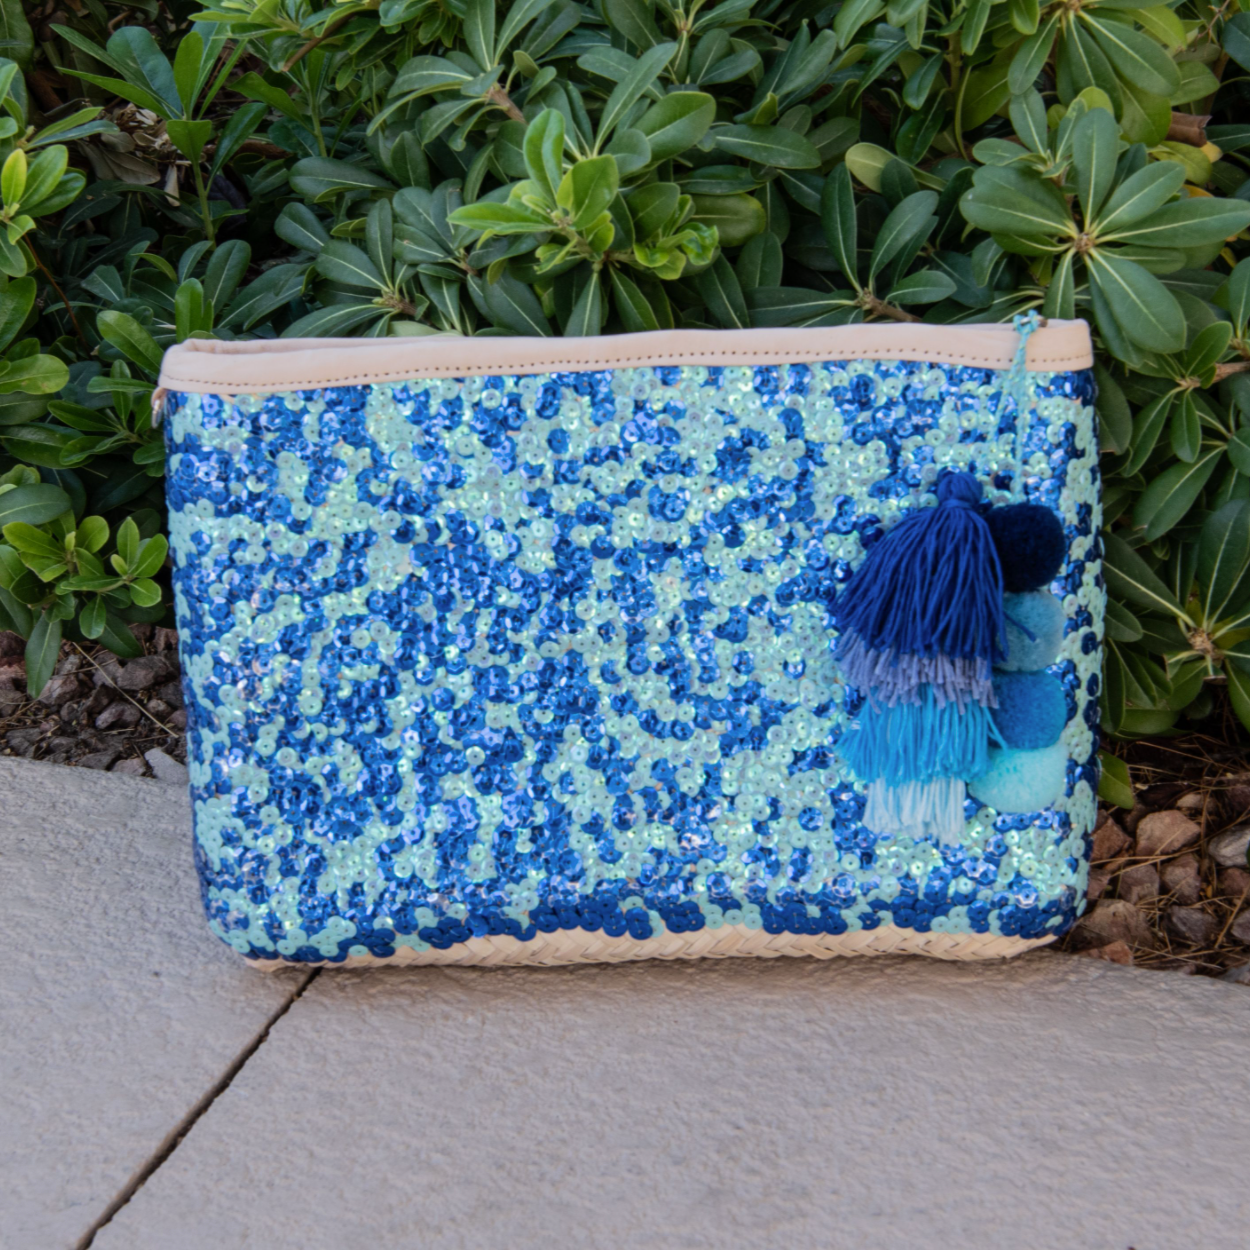 Straw clutch with blue sequin sitting against a green plant